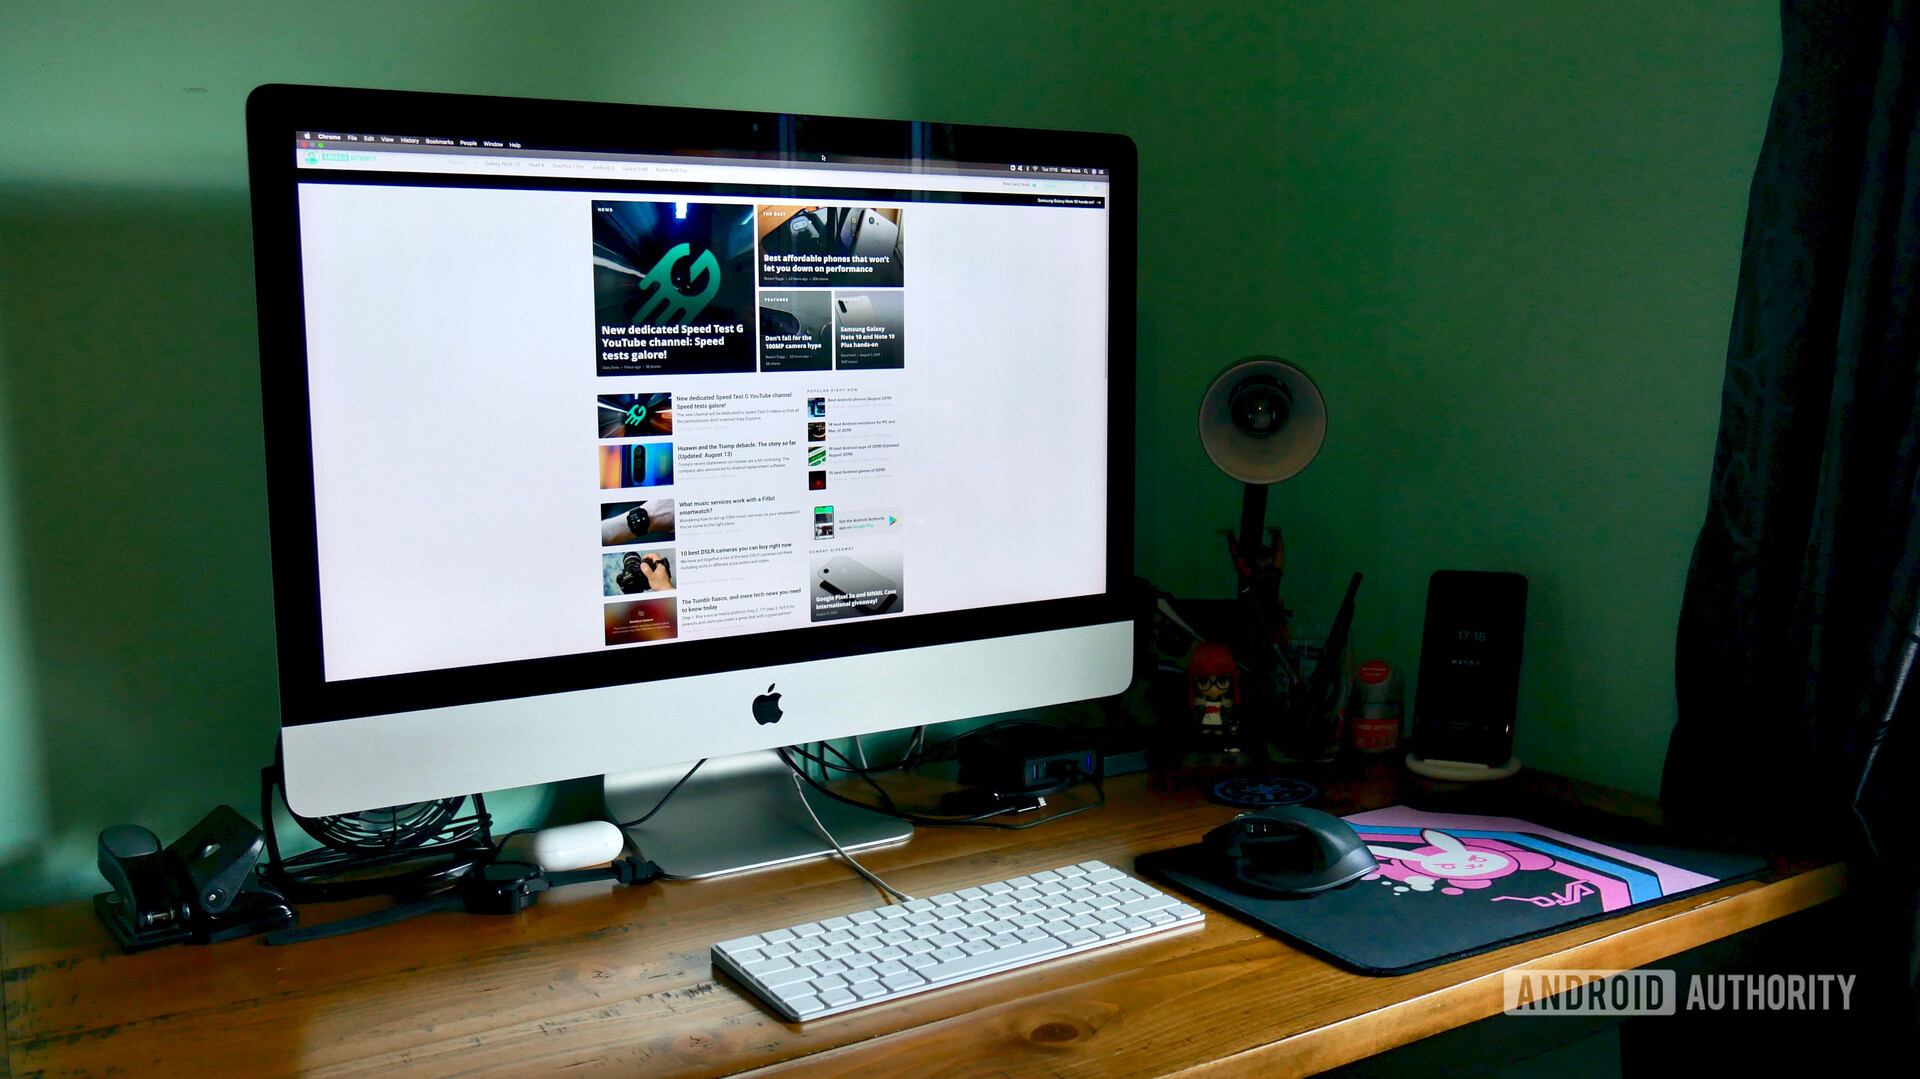 The cheapest countries to buy an iMac